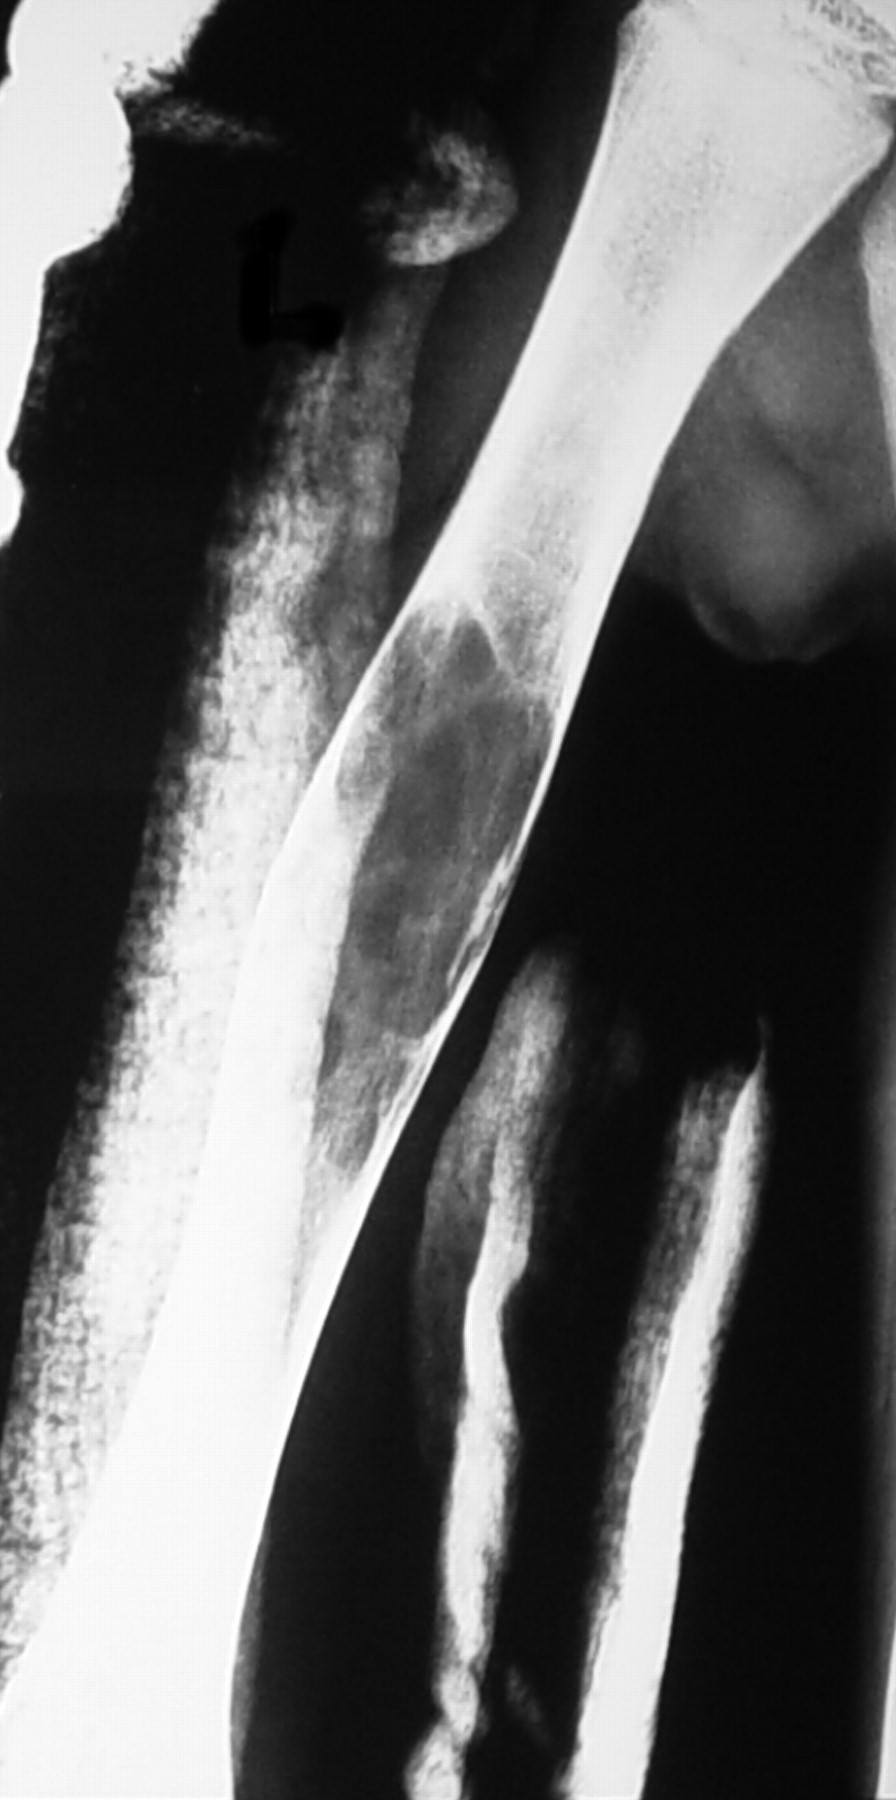 Treatment Of Aneurysmal Bone Cysts With Percutaneous Sclerotherapy Using Polidocanol Bone And Joint 5460